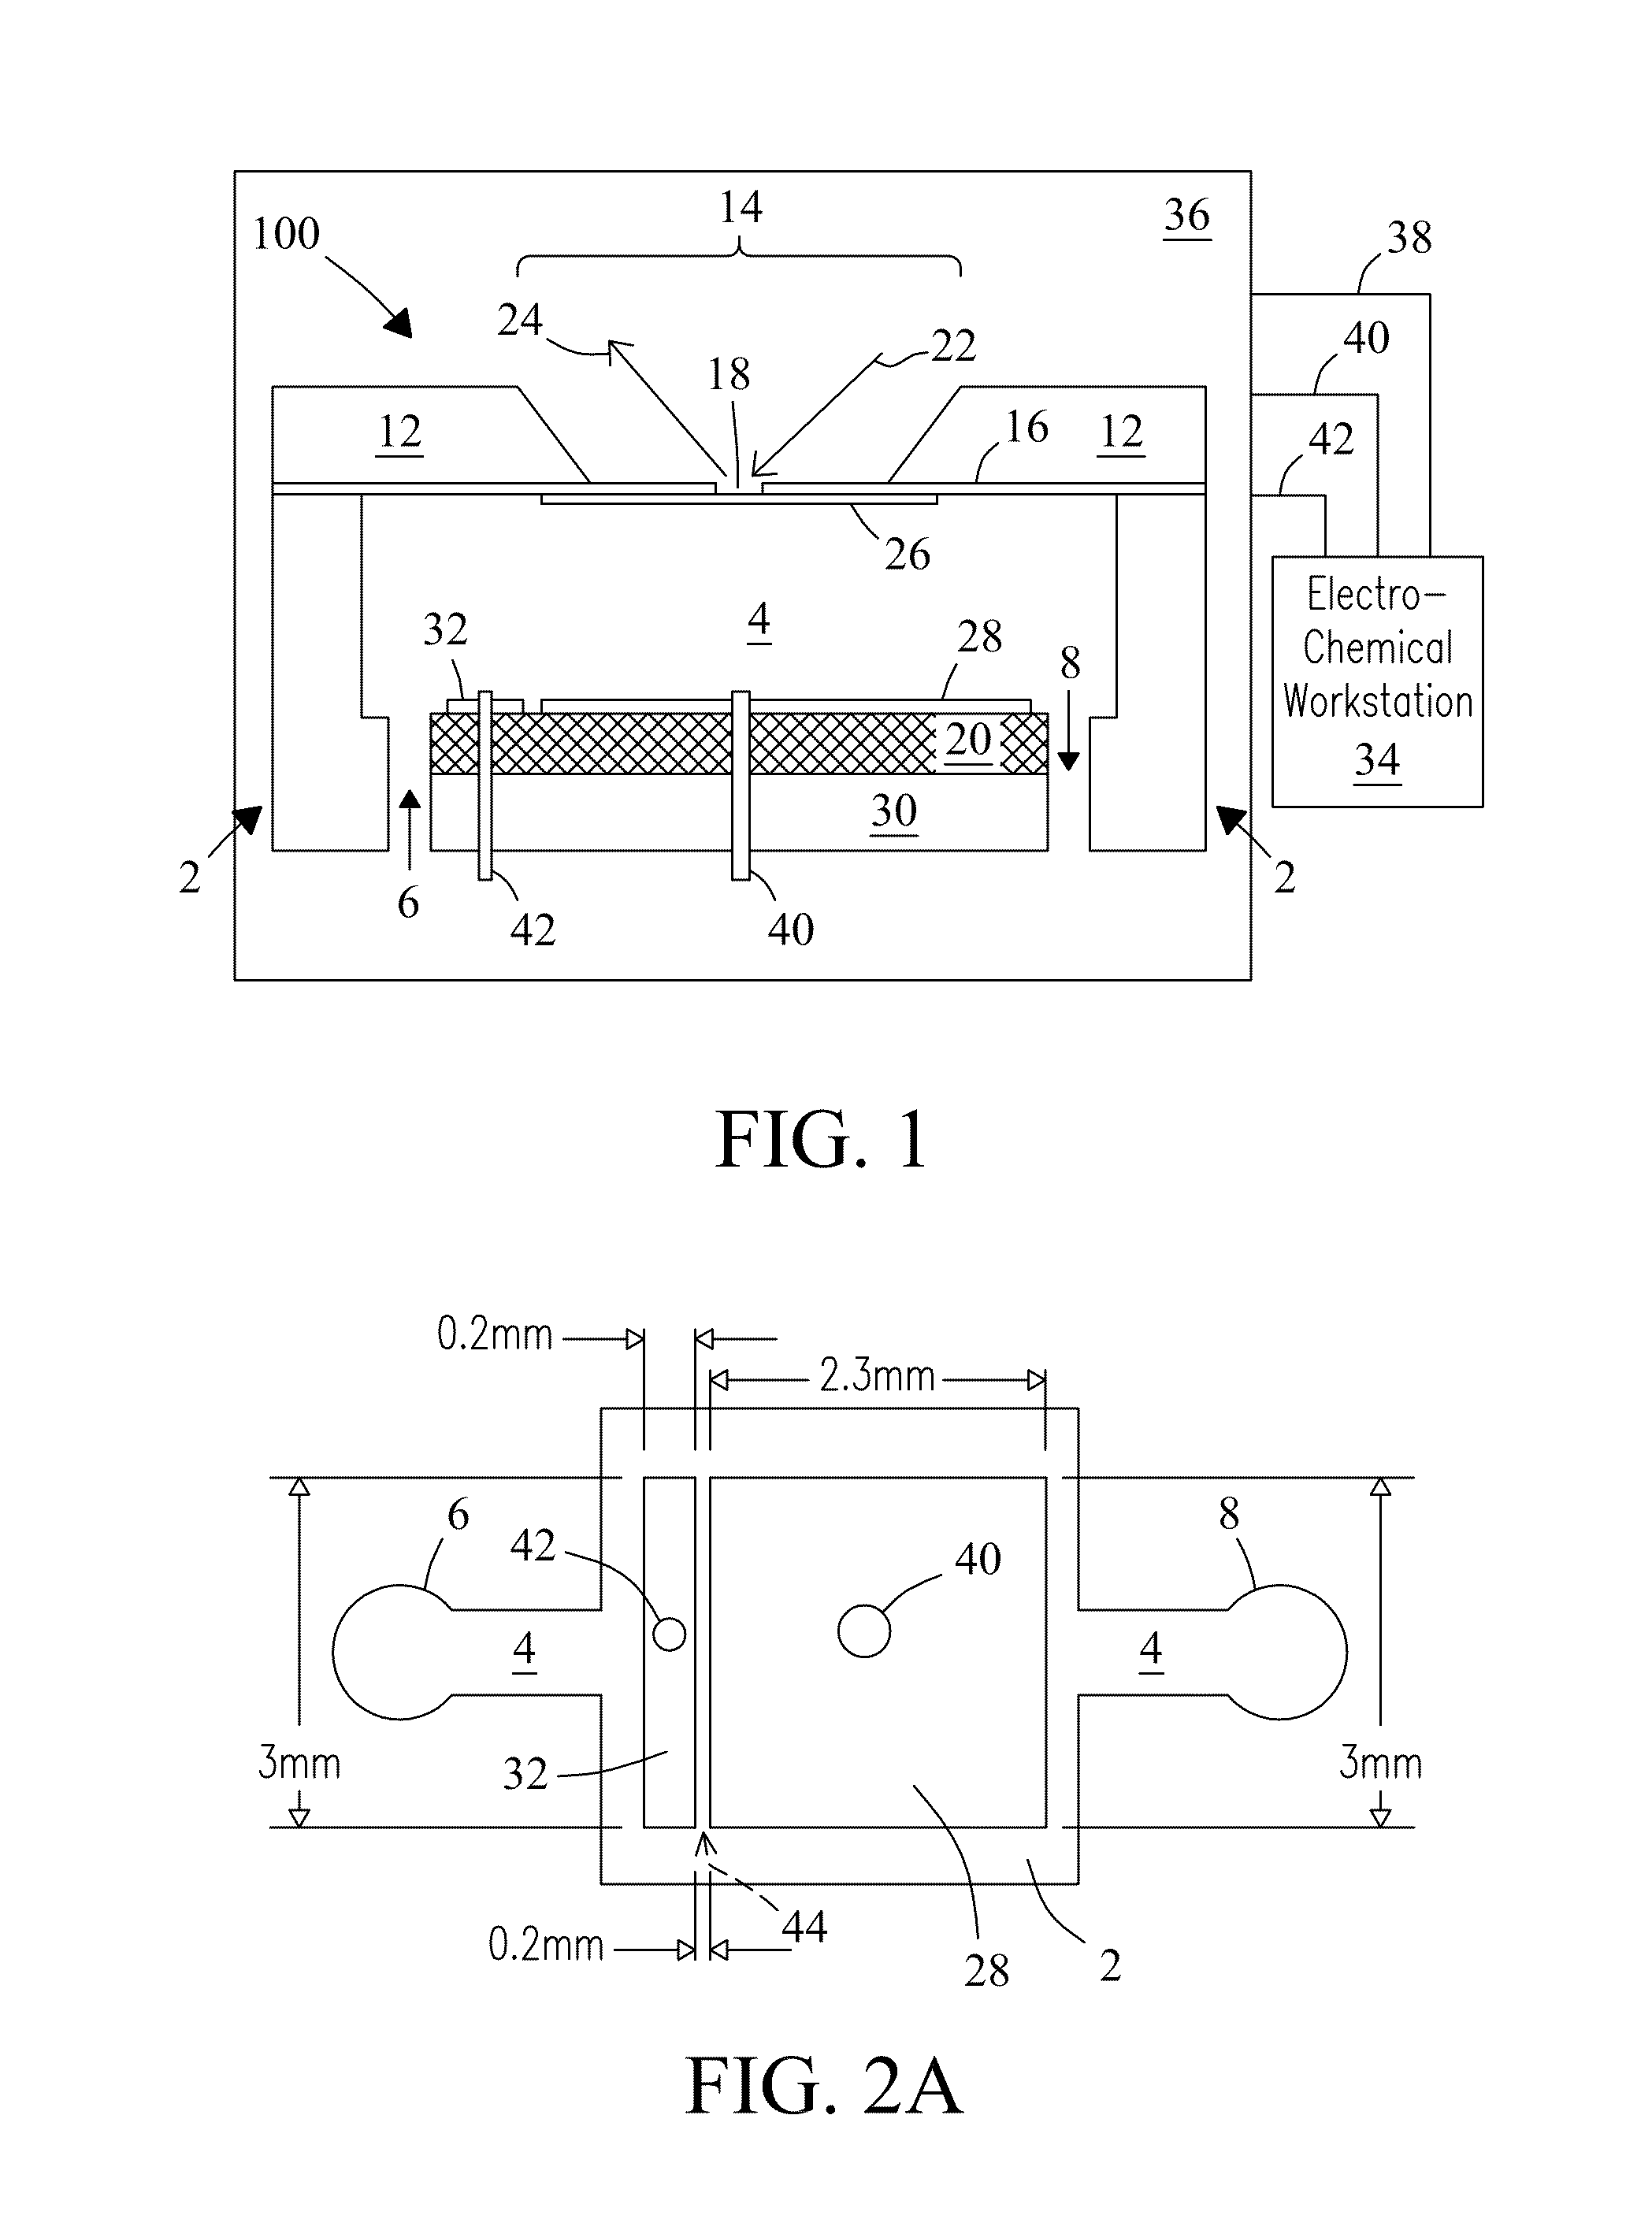 Microfluidic electrochemical device and process for chemical imaging and electrochemical analysis at the electrode-liquid interface in-situ